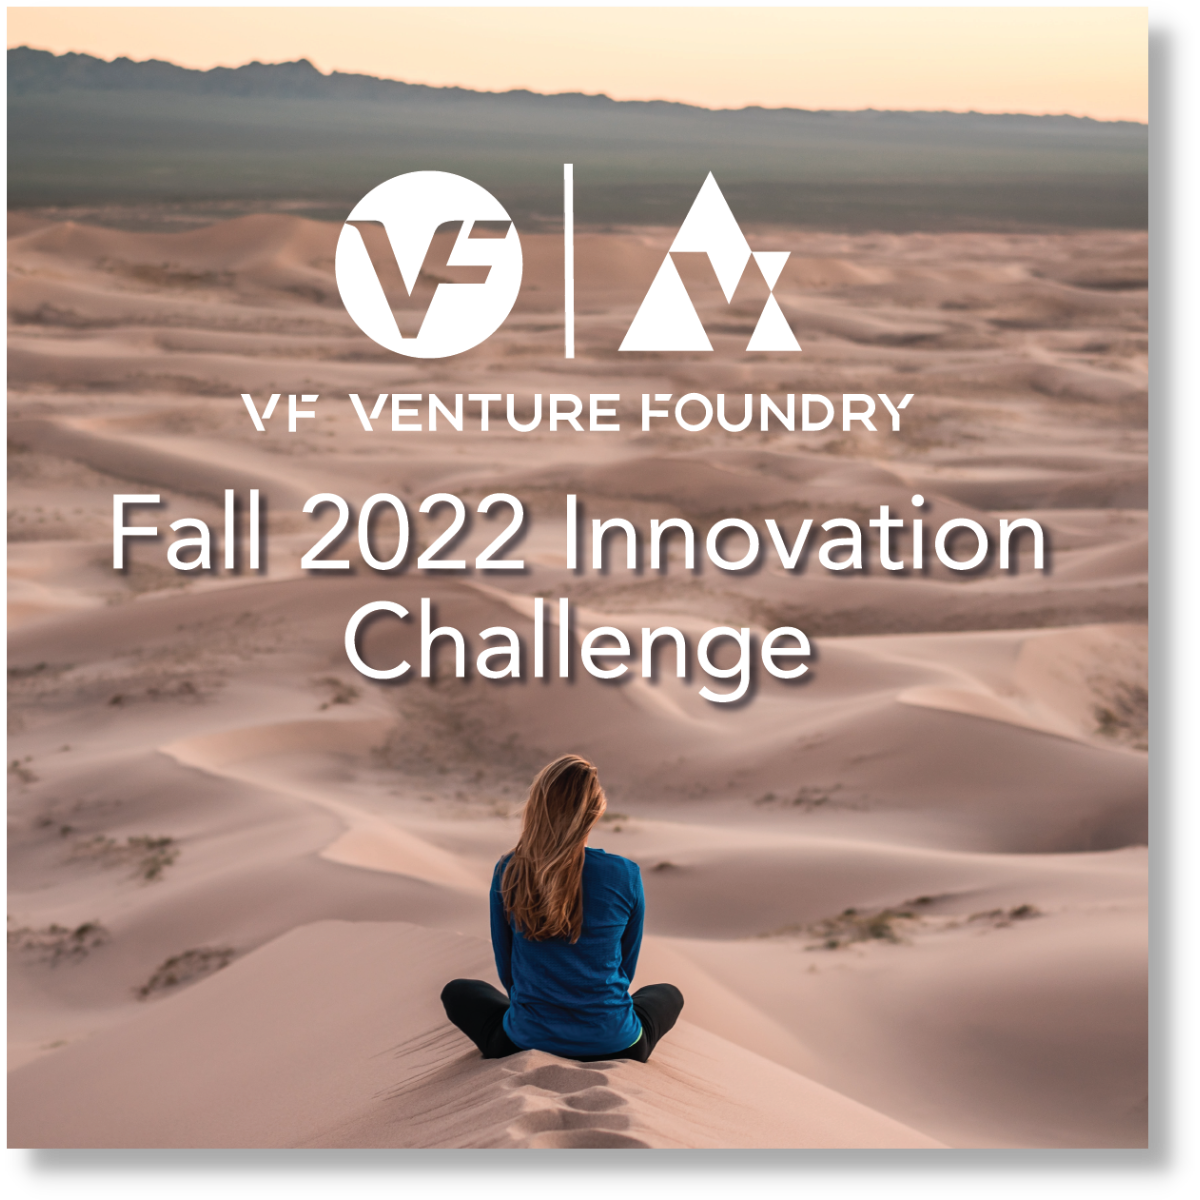 Venture Foundry Fall 2022 Innovation Challenge